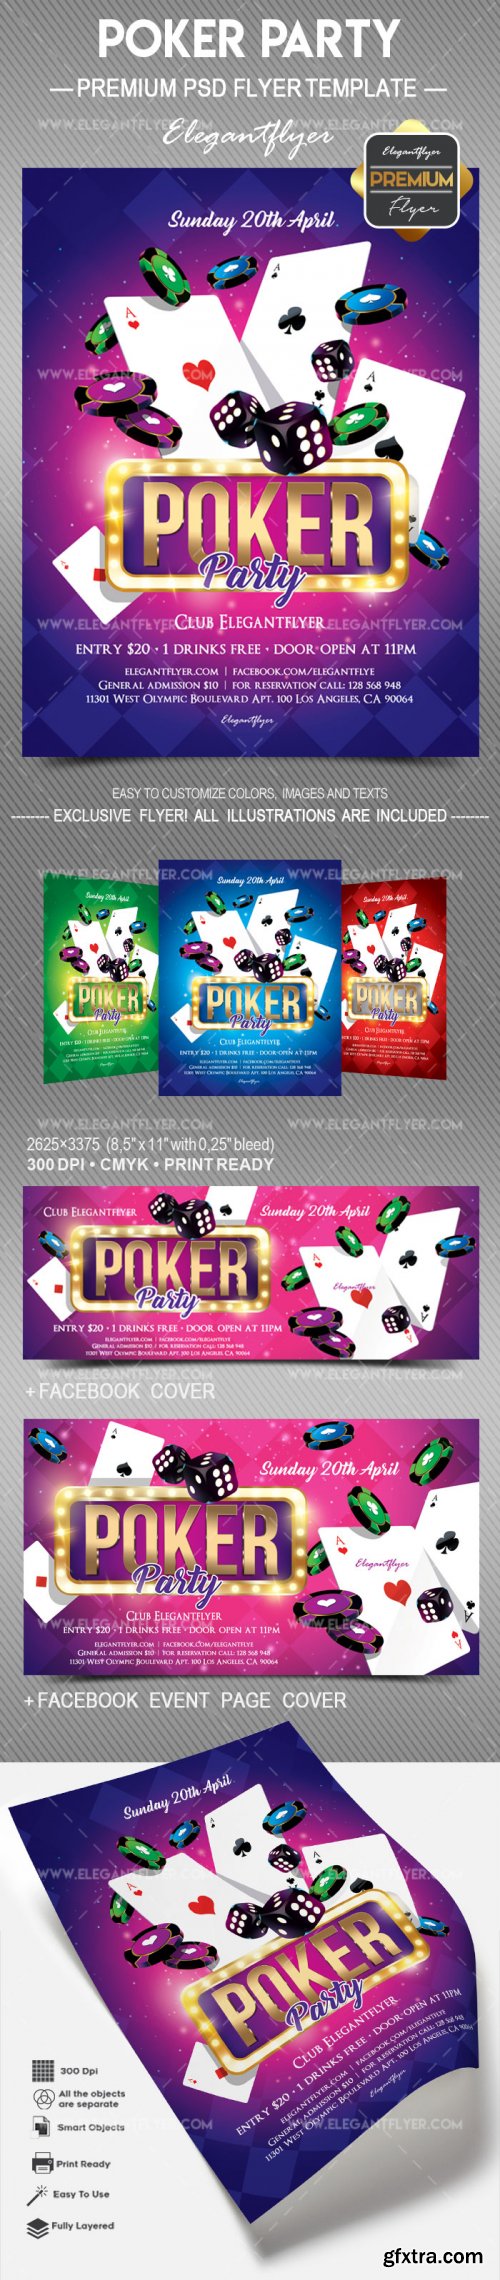 Poker Party V1 2018 Flyer PSD Template + Facebook Cover